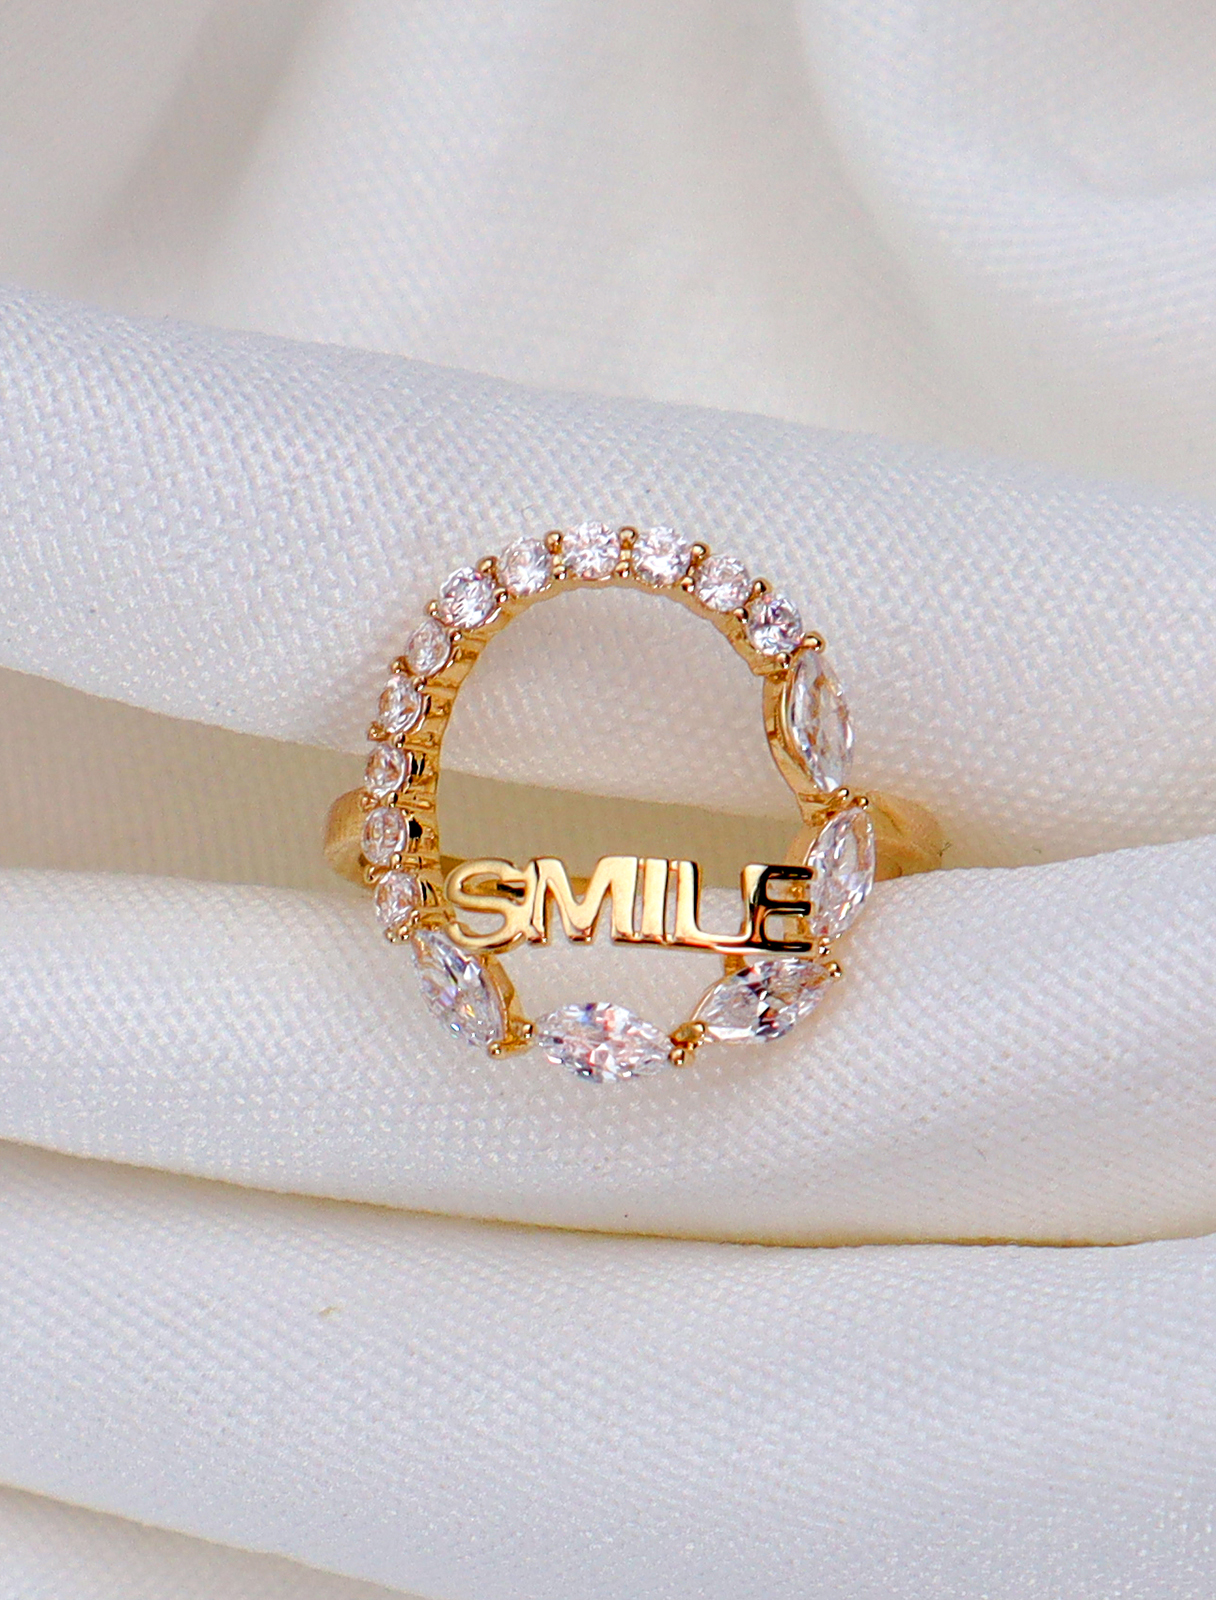 Circle design ring with the word Smile decorated with crystals